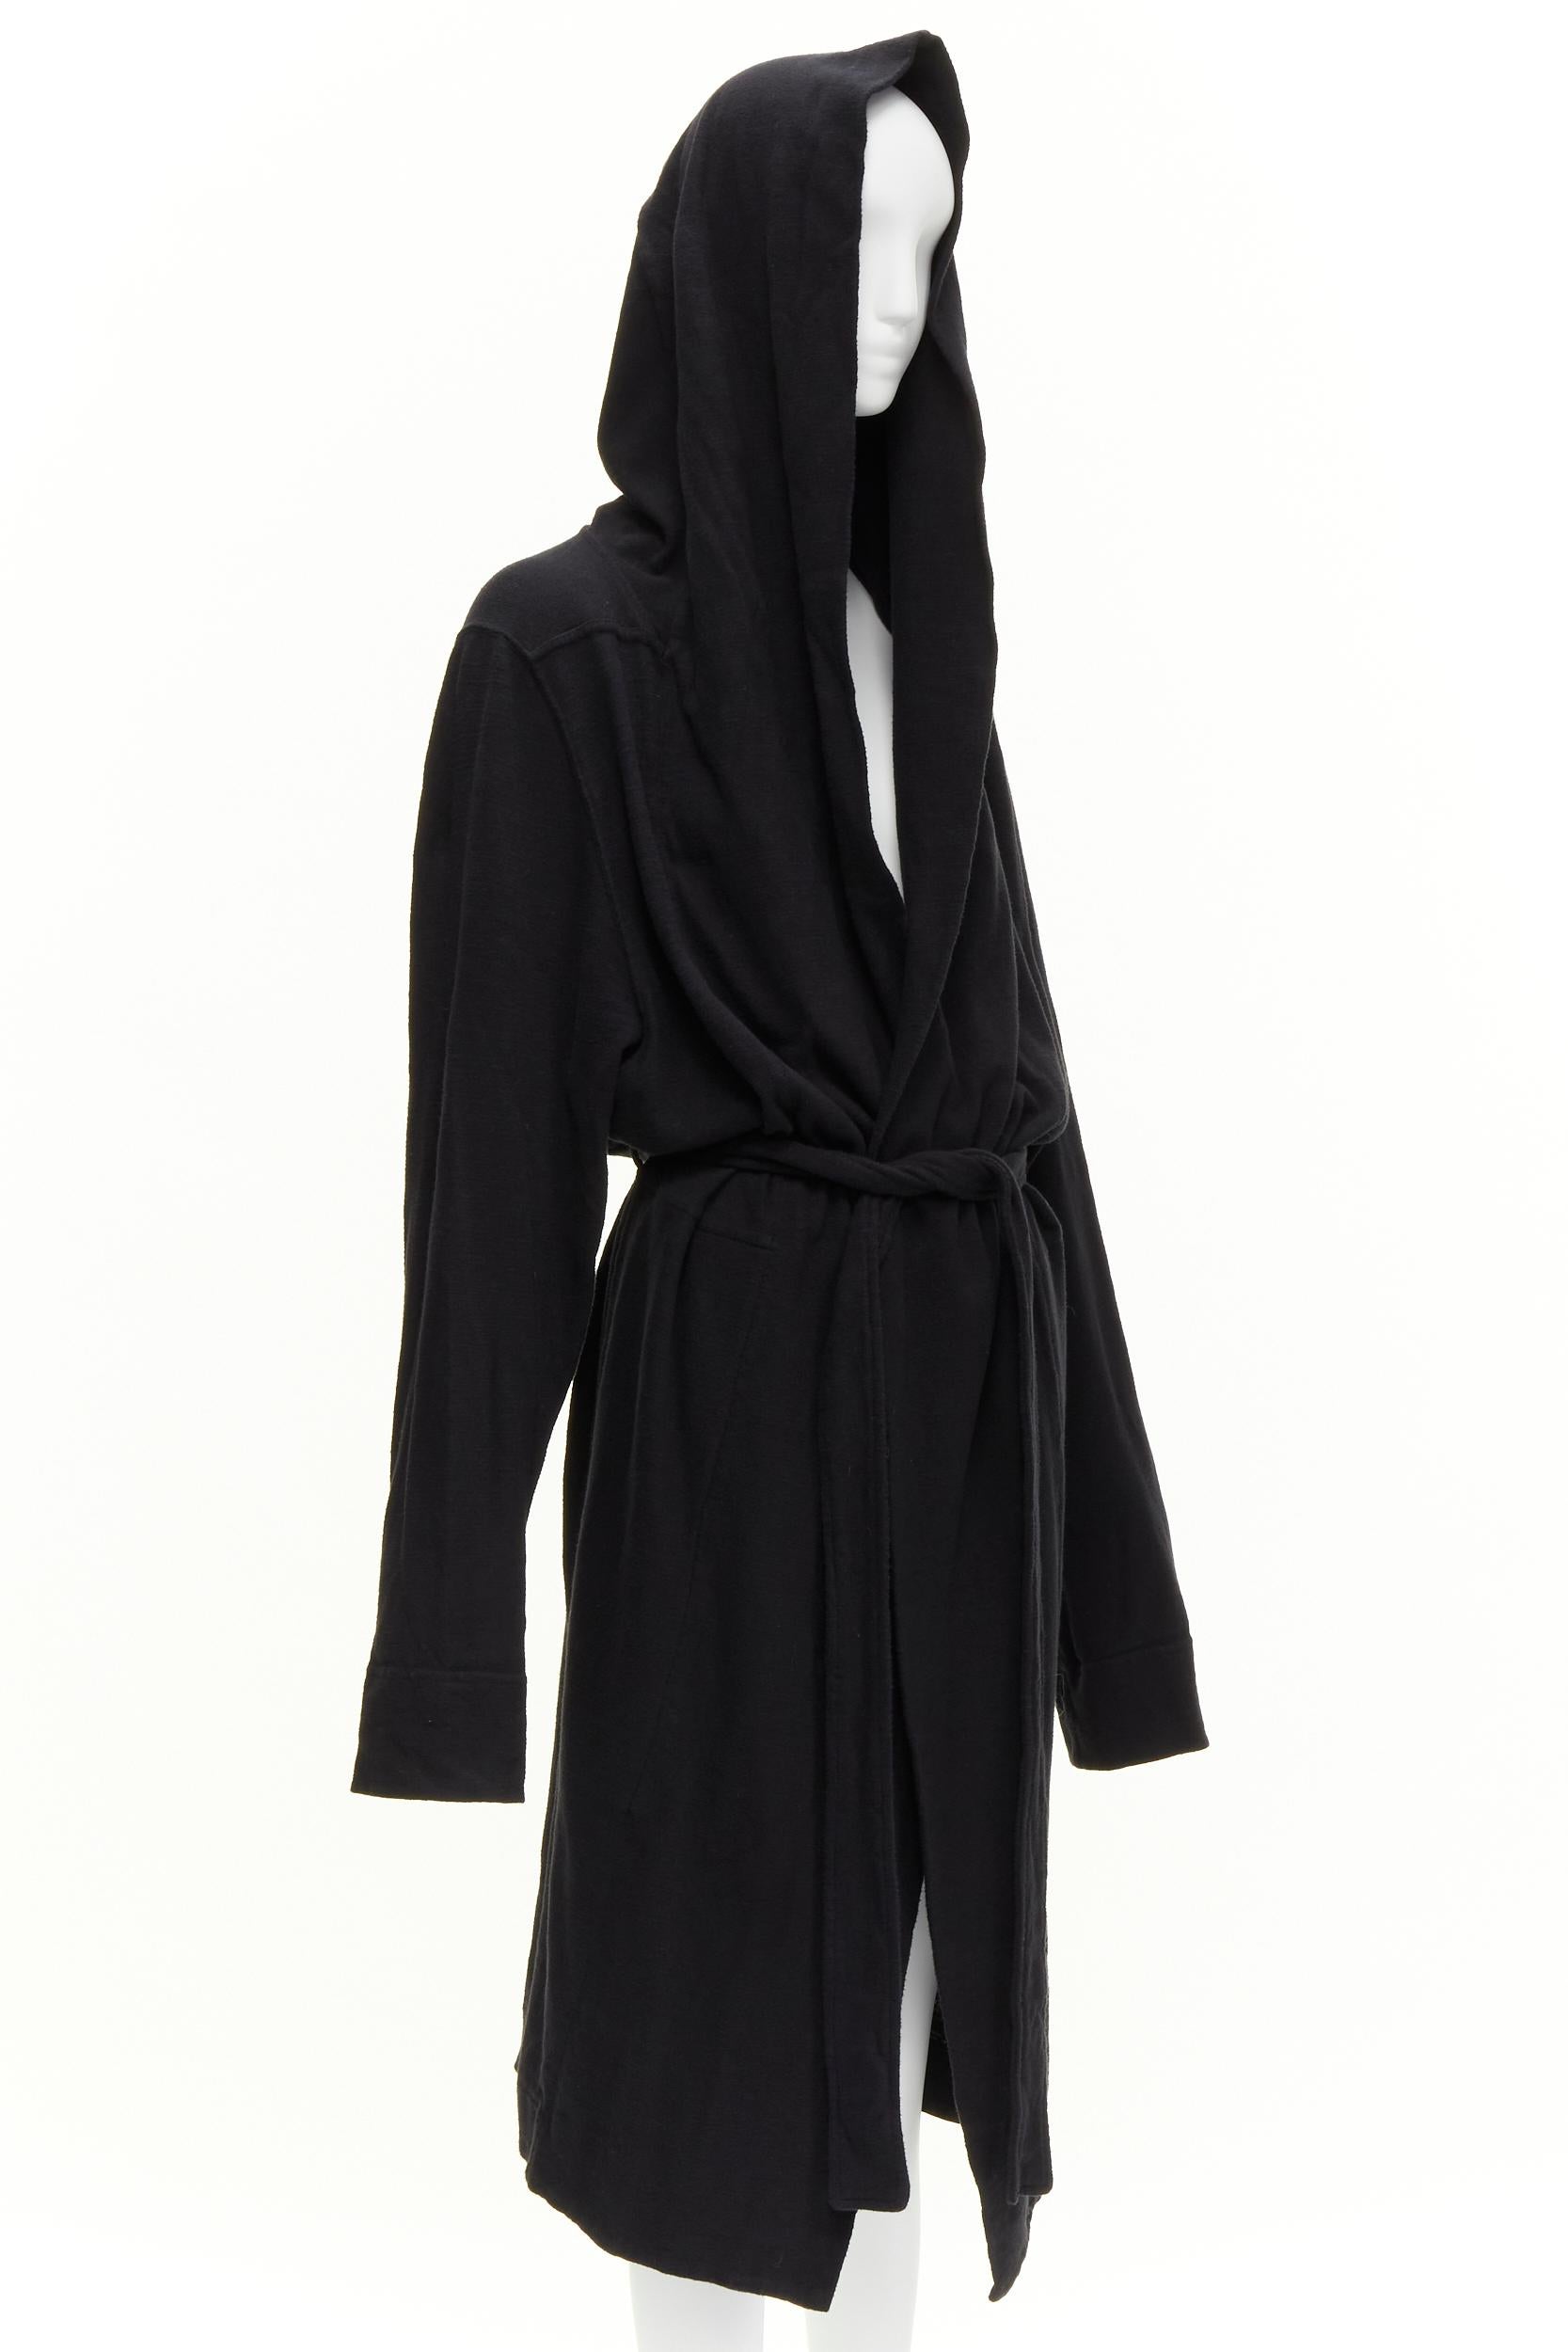 Black RICK OWENS DRKSHDW black cotton thick jersey hooded belted robe jacket S For Sale